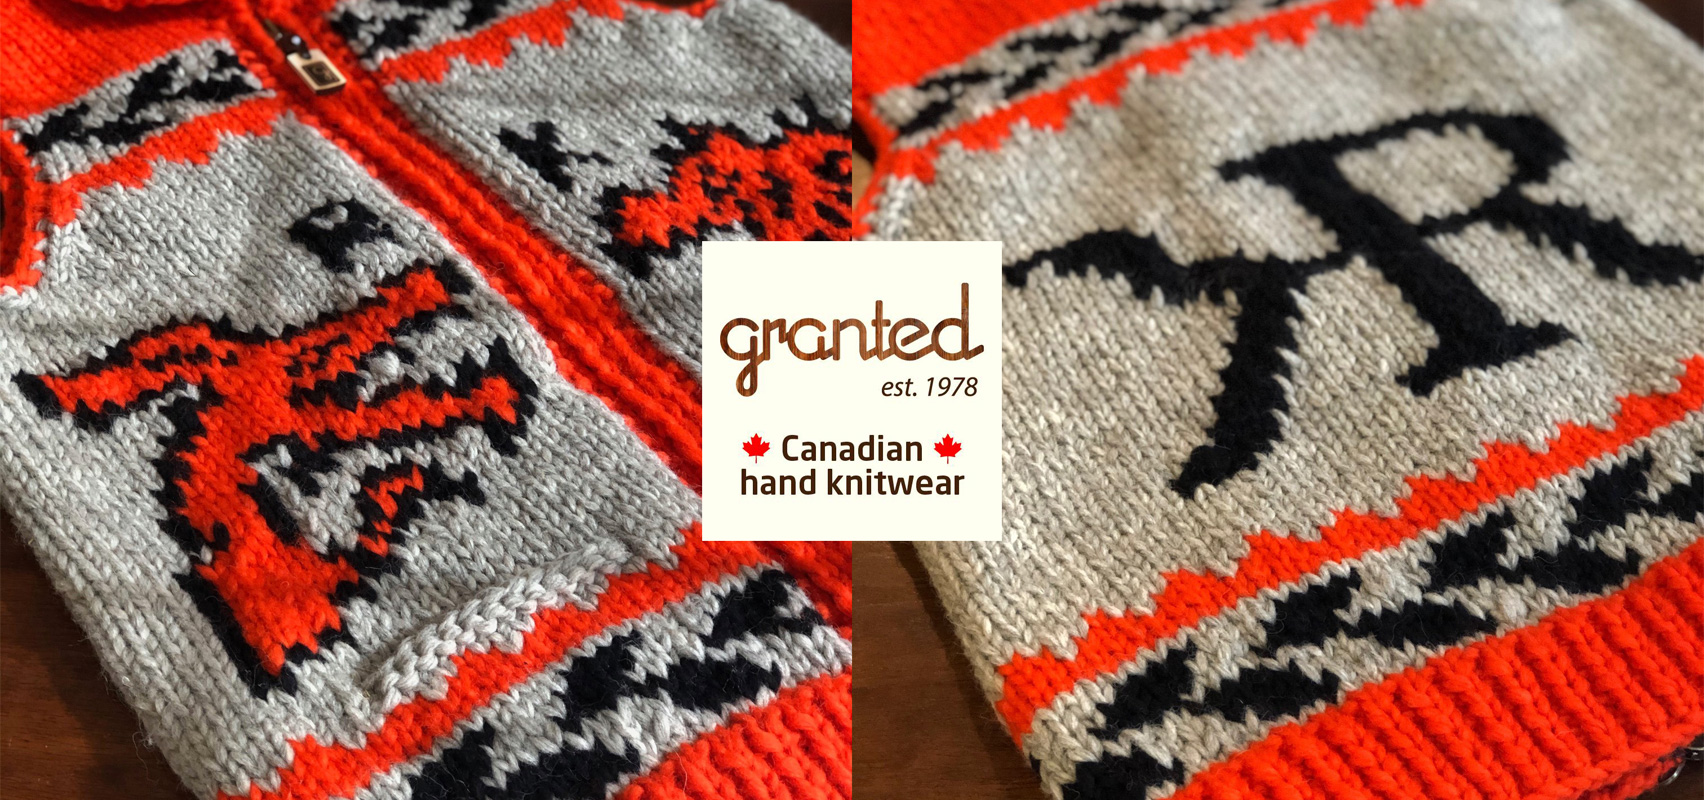 ［RK OFFICIAL STORE］RK GEAR by Richard Kawaguchi リチャード川口 from RK English School RKES オリジナル アパレル & グッズ 販売 The Granted Sweater Company Canadian Heritage Cowichan カウチンセーター Canada Vancouver BC カナダ バンクーバー Vest ベスト セーター